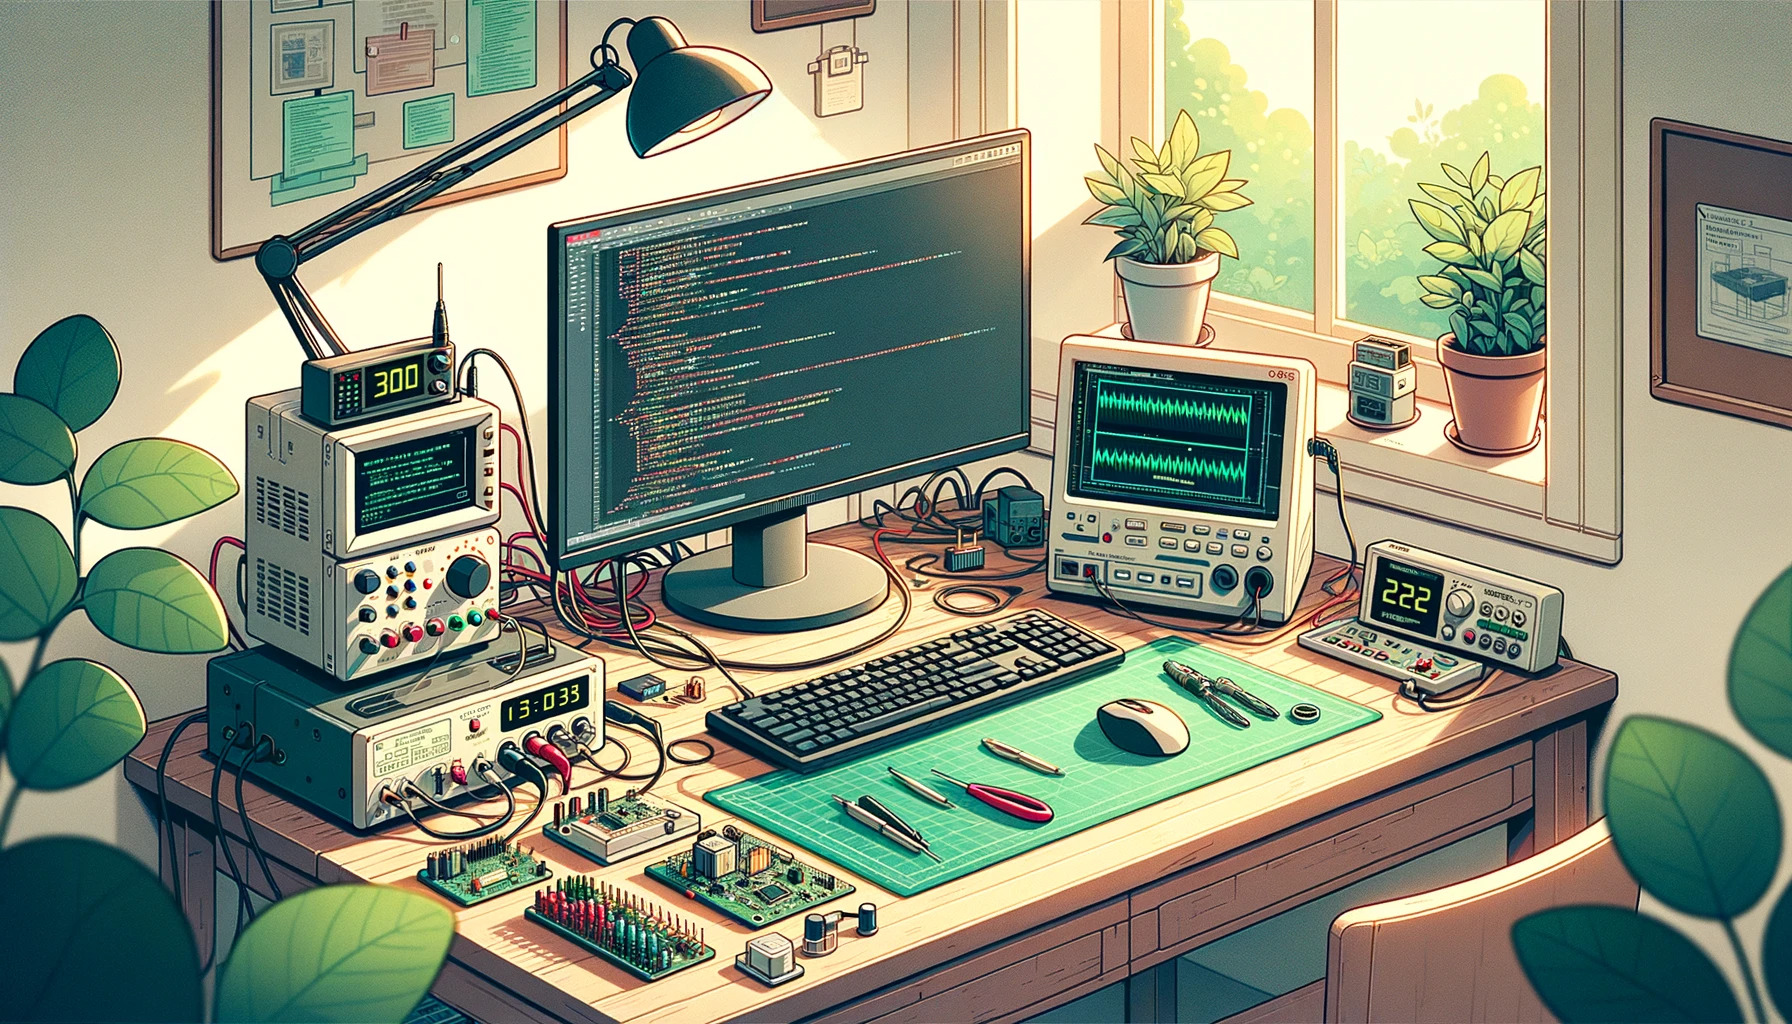 Illustration for a small tech company's website banner. The scene captures a close-up of a tidy electronics workbench in a bright room. A powerful PC setup with dual monitors dominates the desk, one showing coding in progress. Essential gadgets, including an oscilloscope and power source, sit neatly above the screens. The desk's right has a green protective sheet, an electronic board wired to the aforementioned gadgets, and hints of soldering tools. A touch of greenery peeks from a window beside the workbench, contrasting the high-tech environment. The whole image has a soft and warm hue, maintaining a 4:3 aspect ratio.